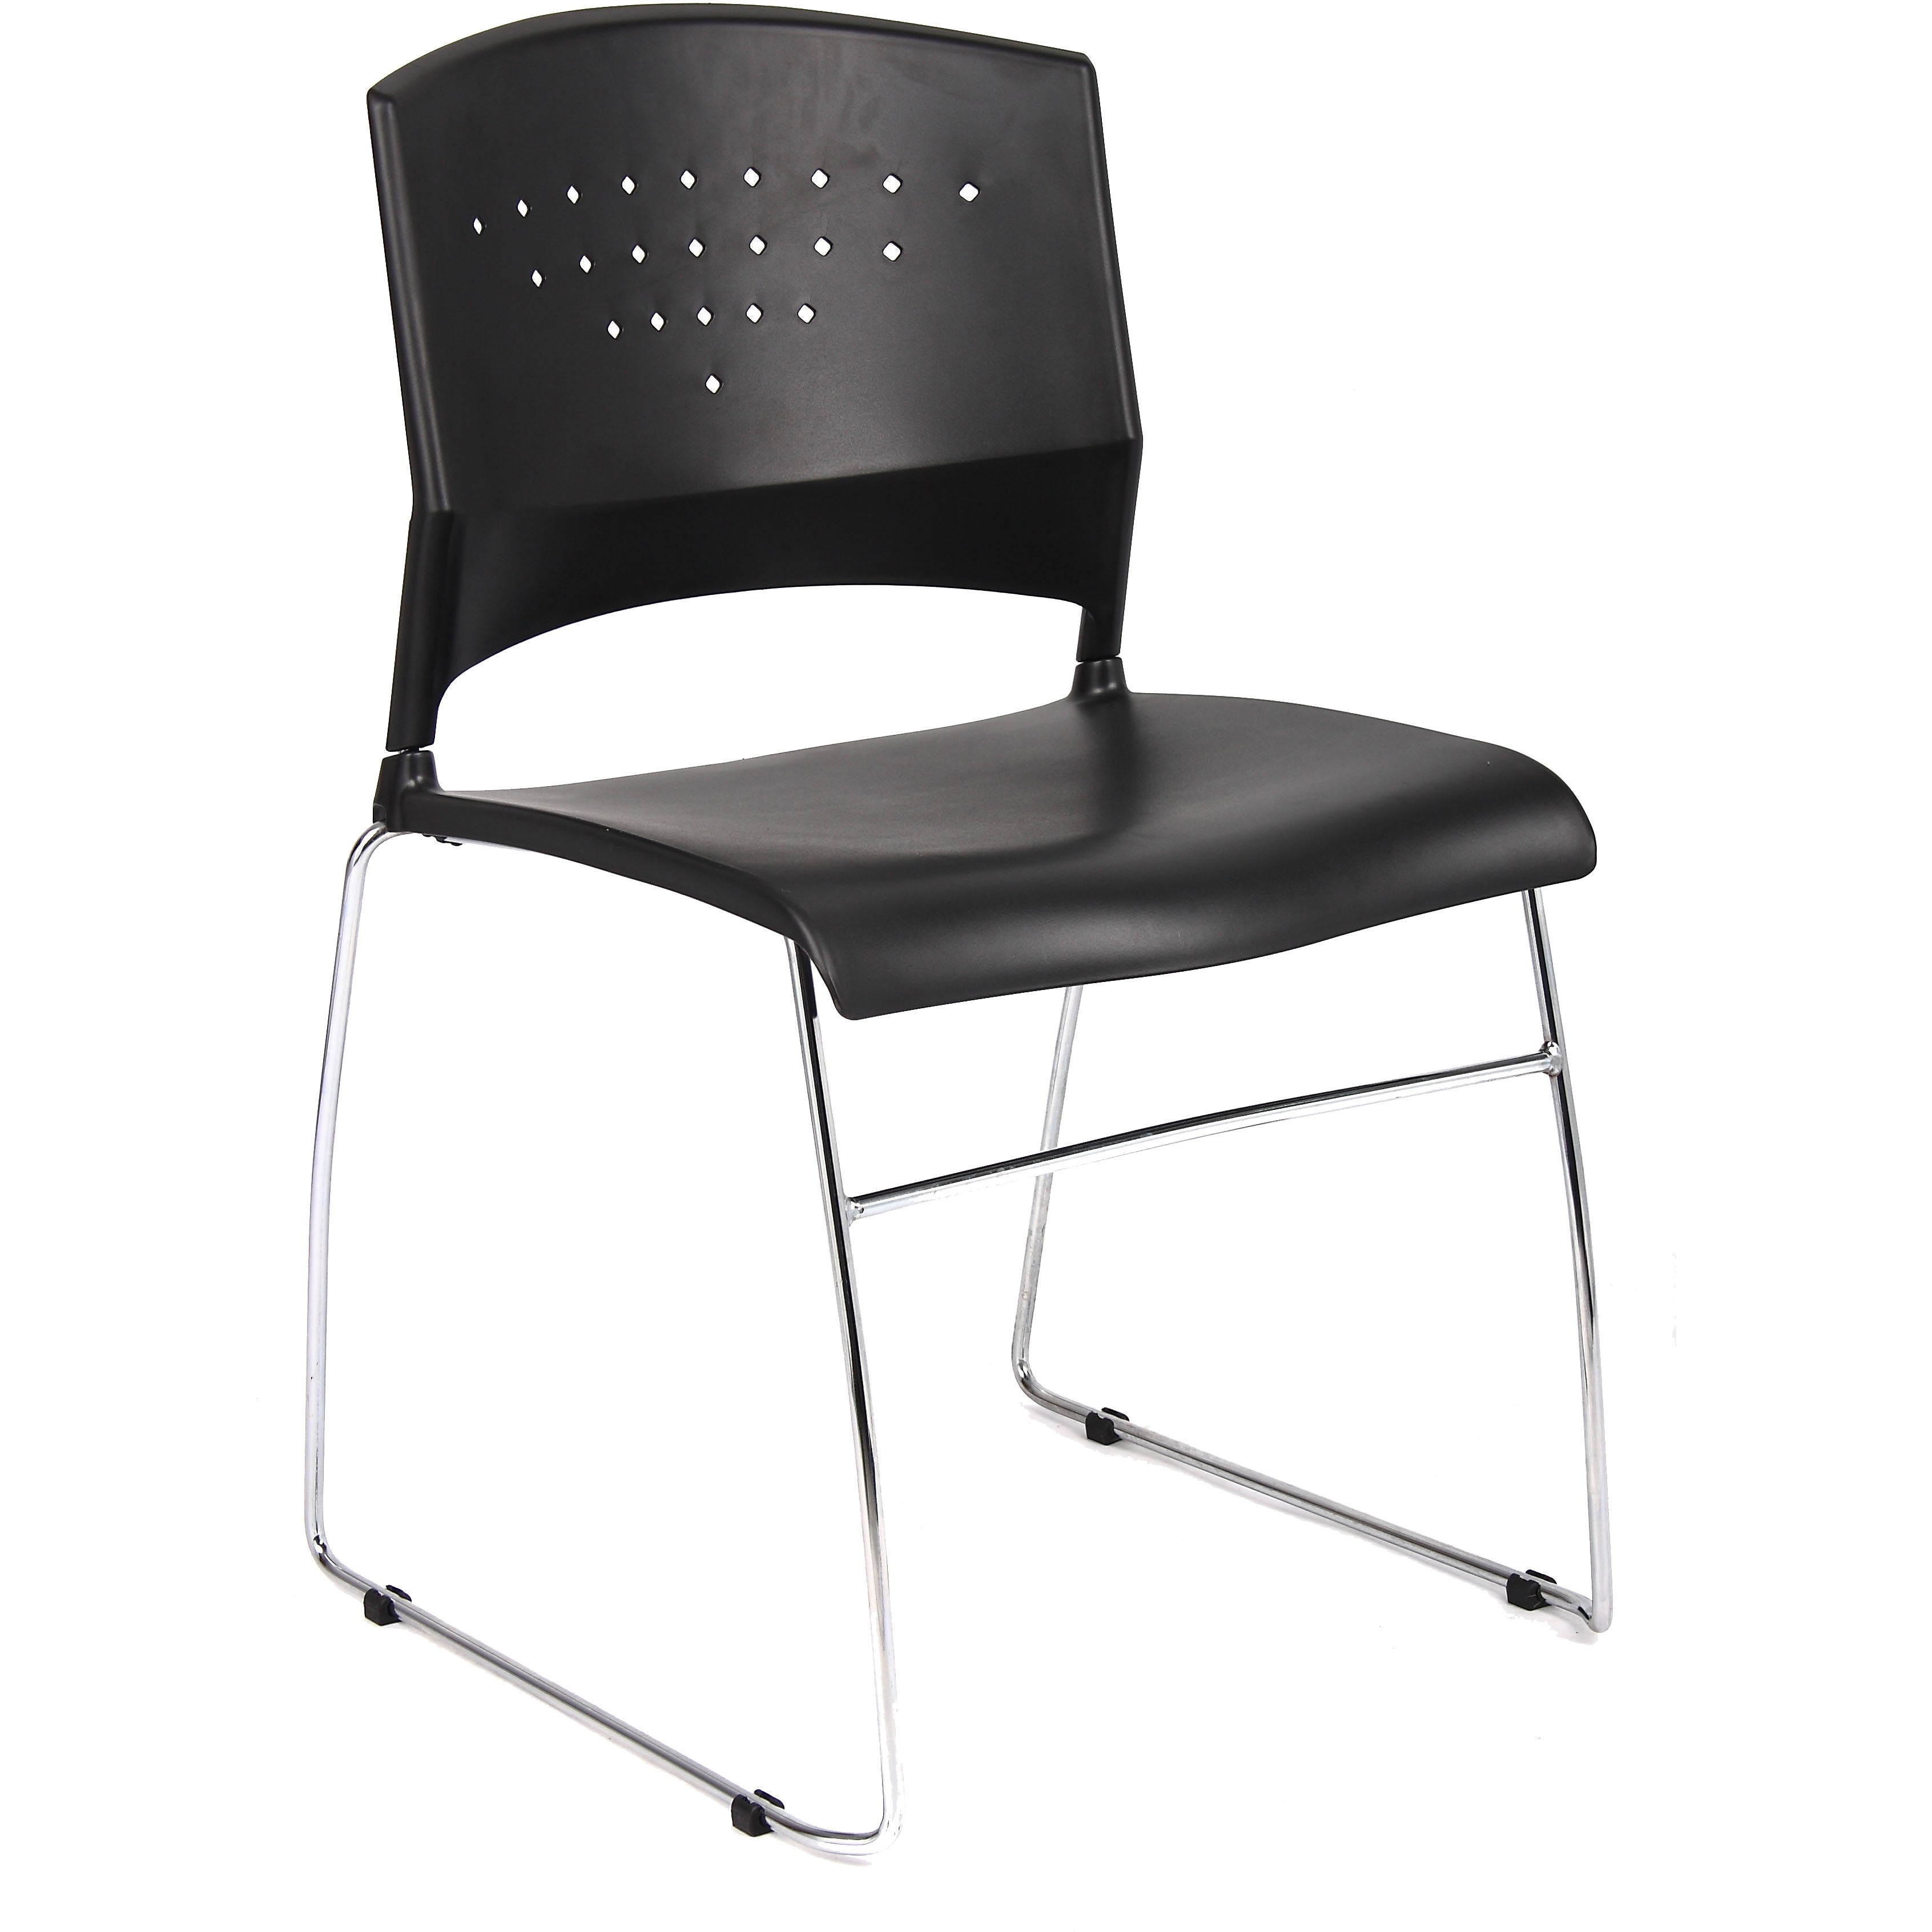 Black Stack Chair With Chrome Frame (Pack of 2), B1400-BK-2